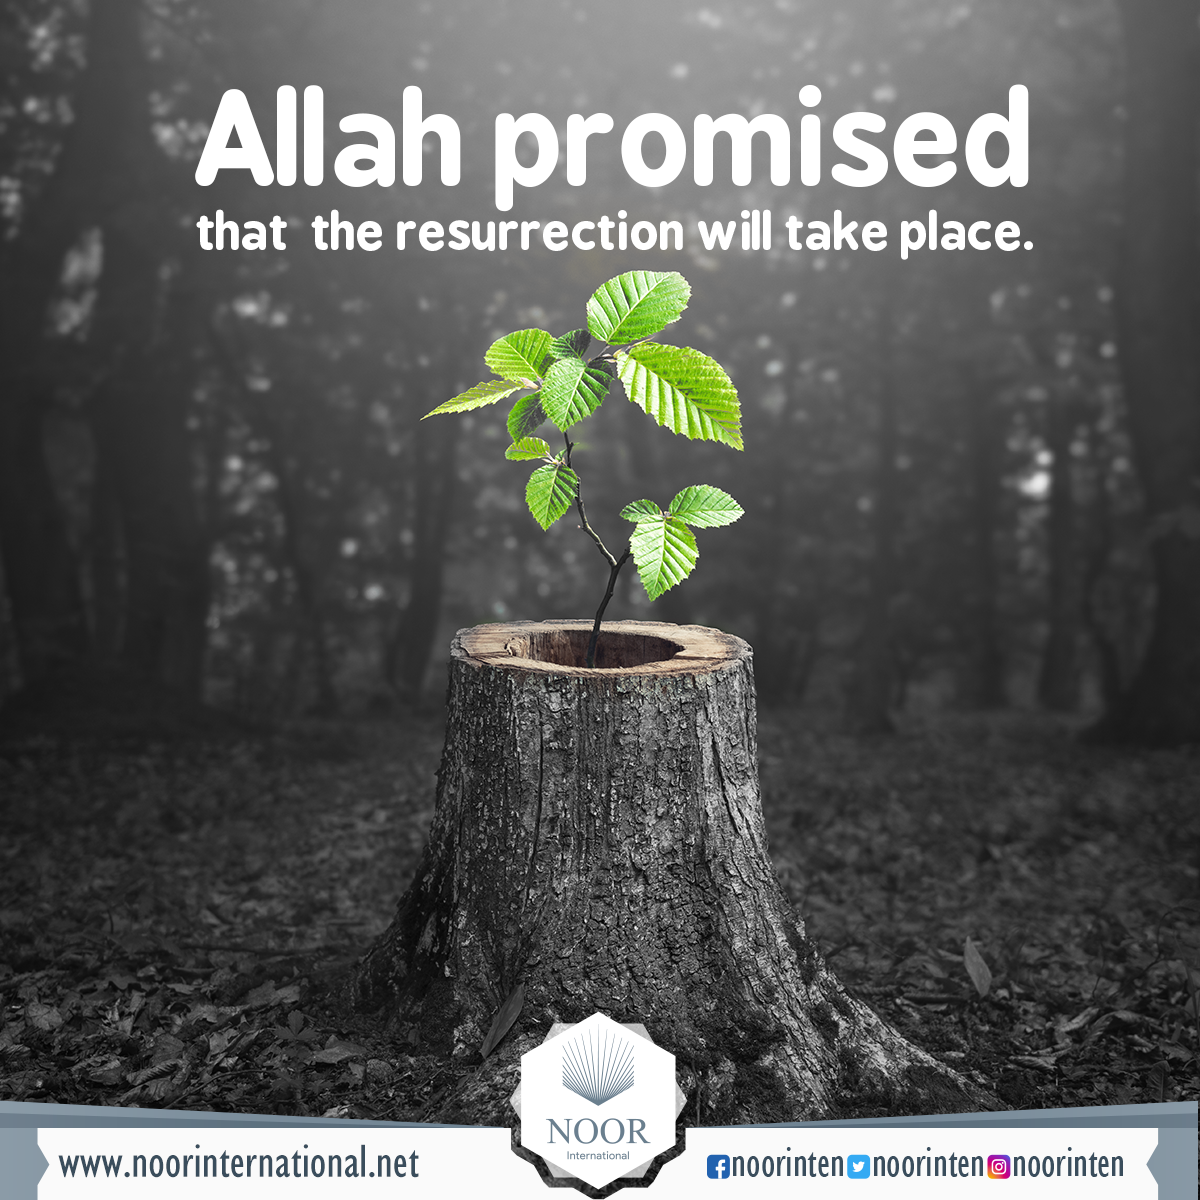 Allah promised that  the resurrection will take place.